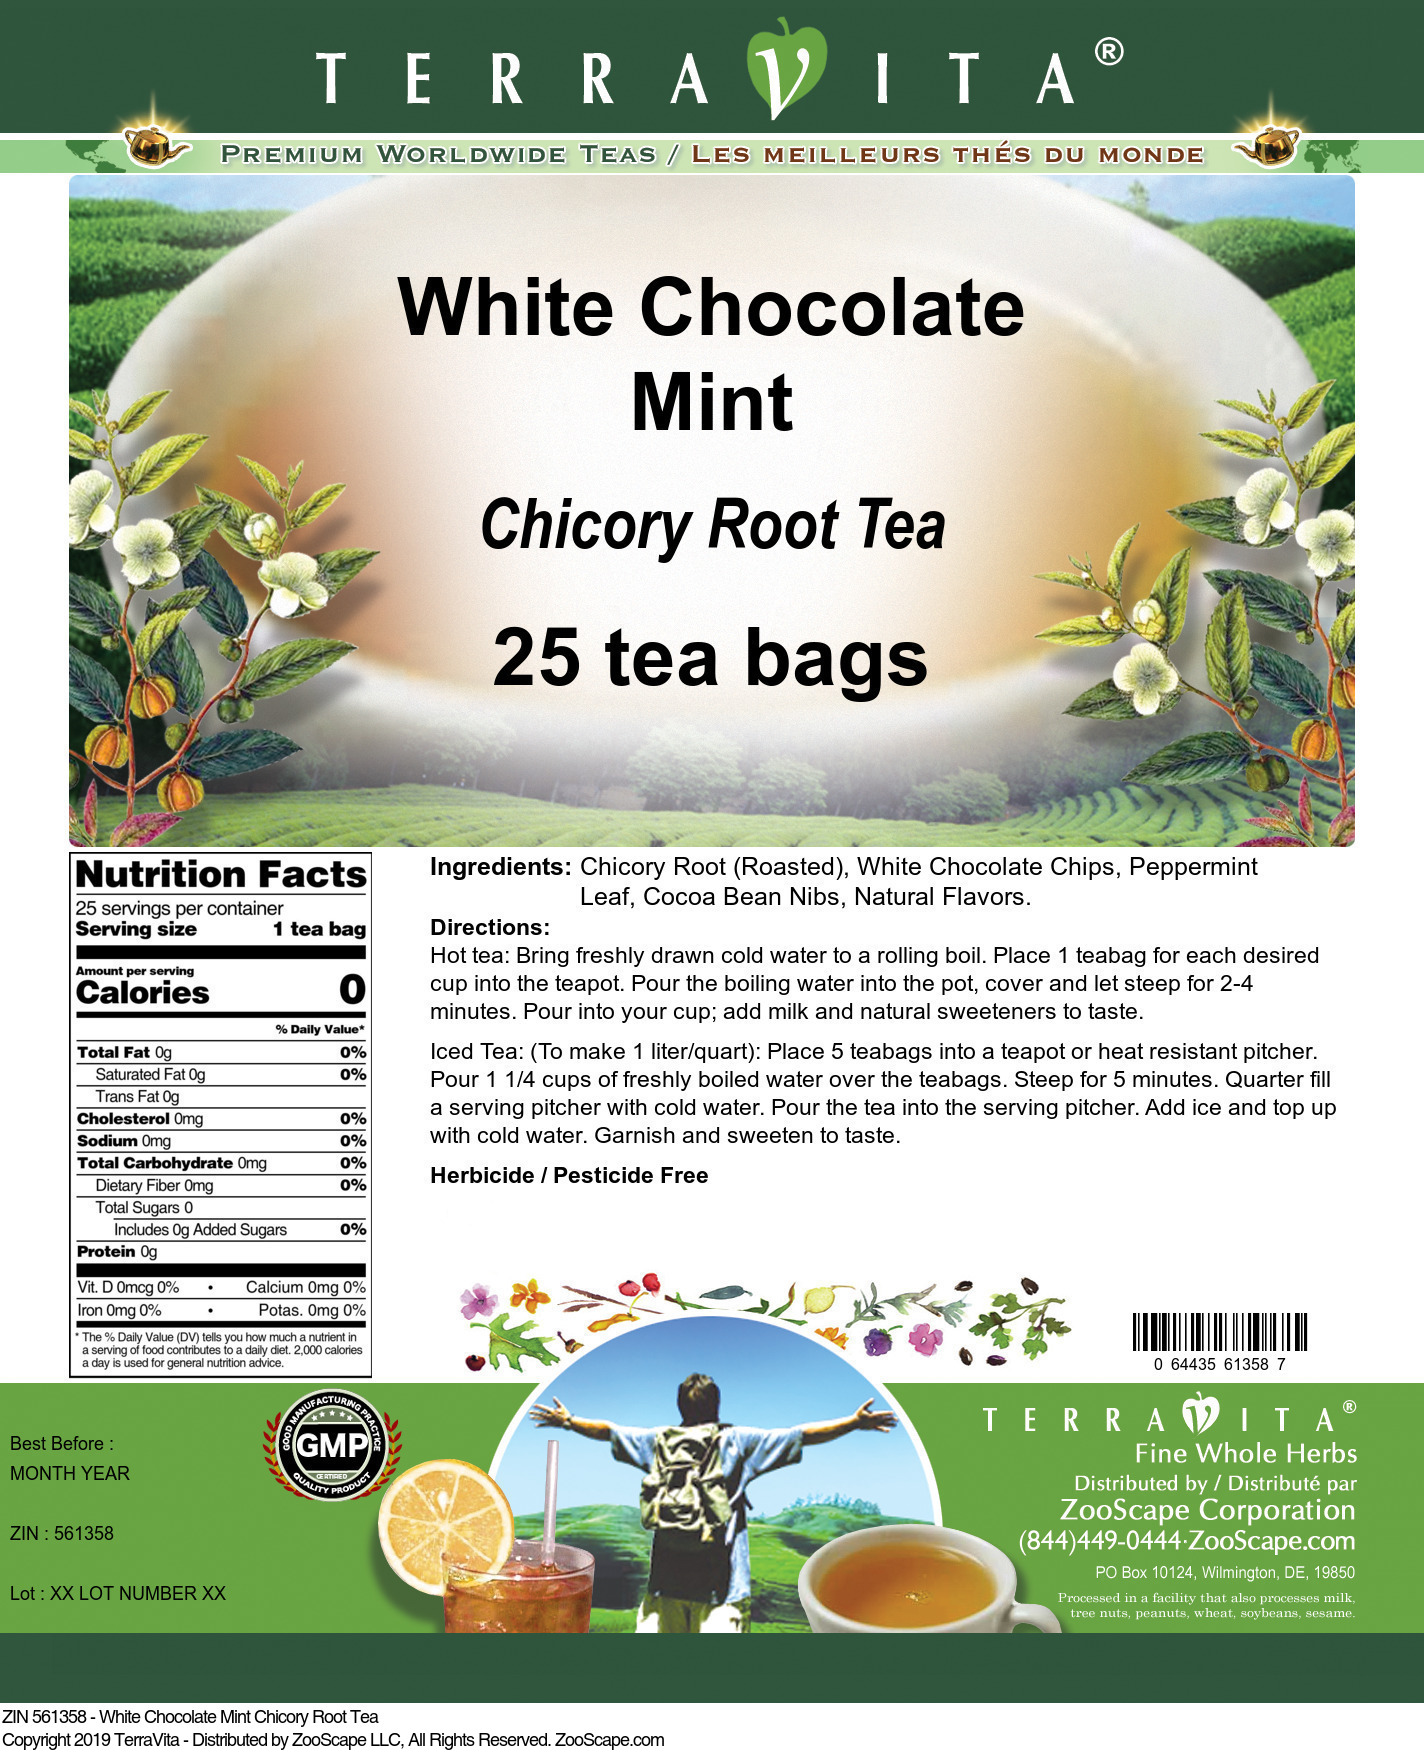 White Chocolate Mint Chicory Root Tea - Label